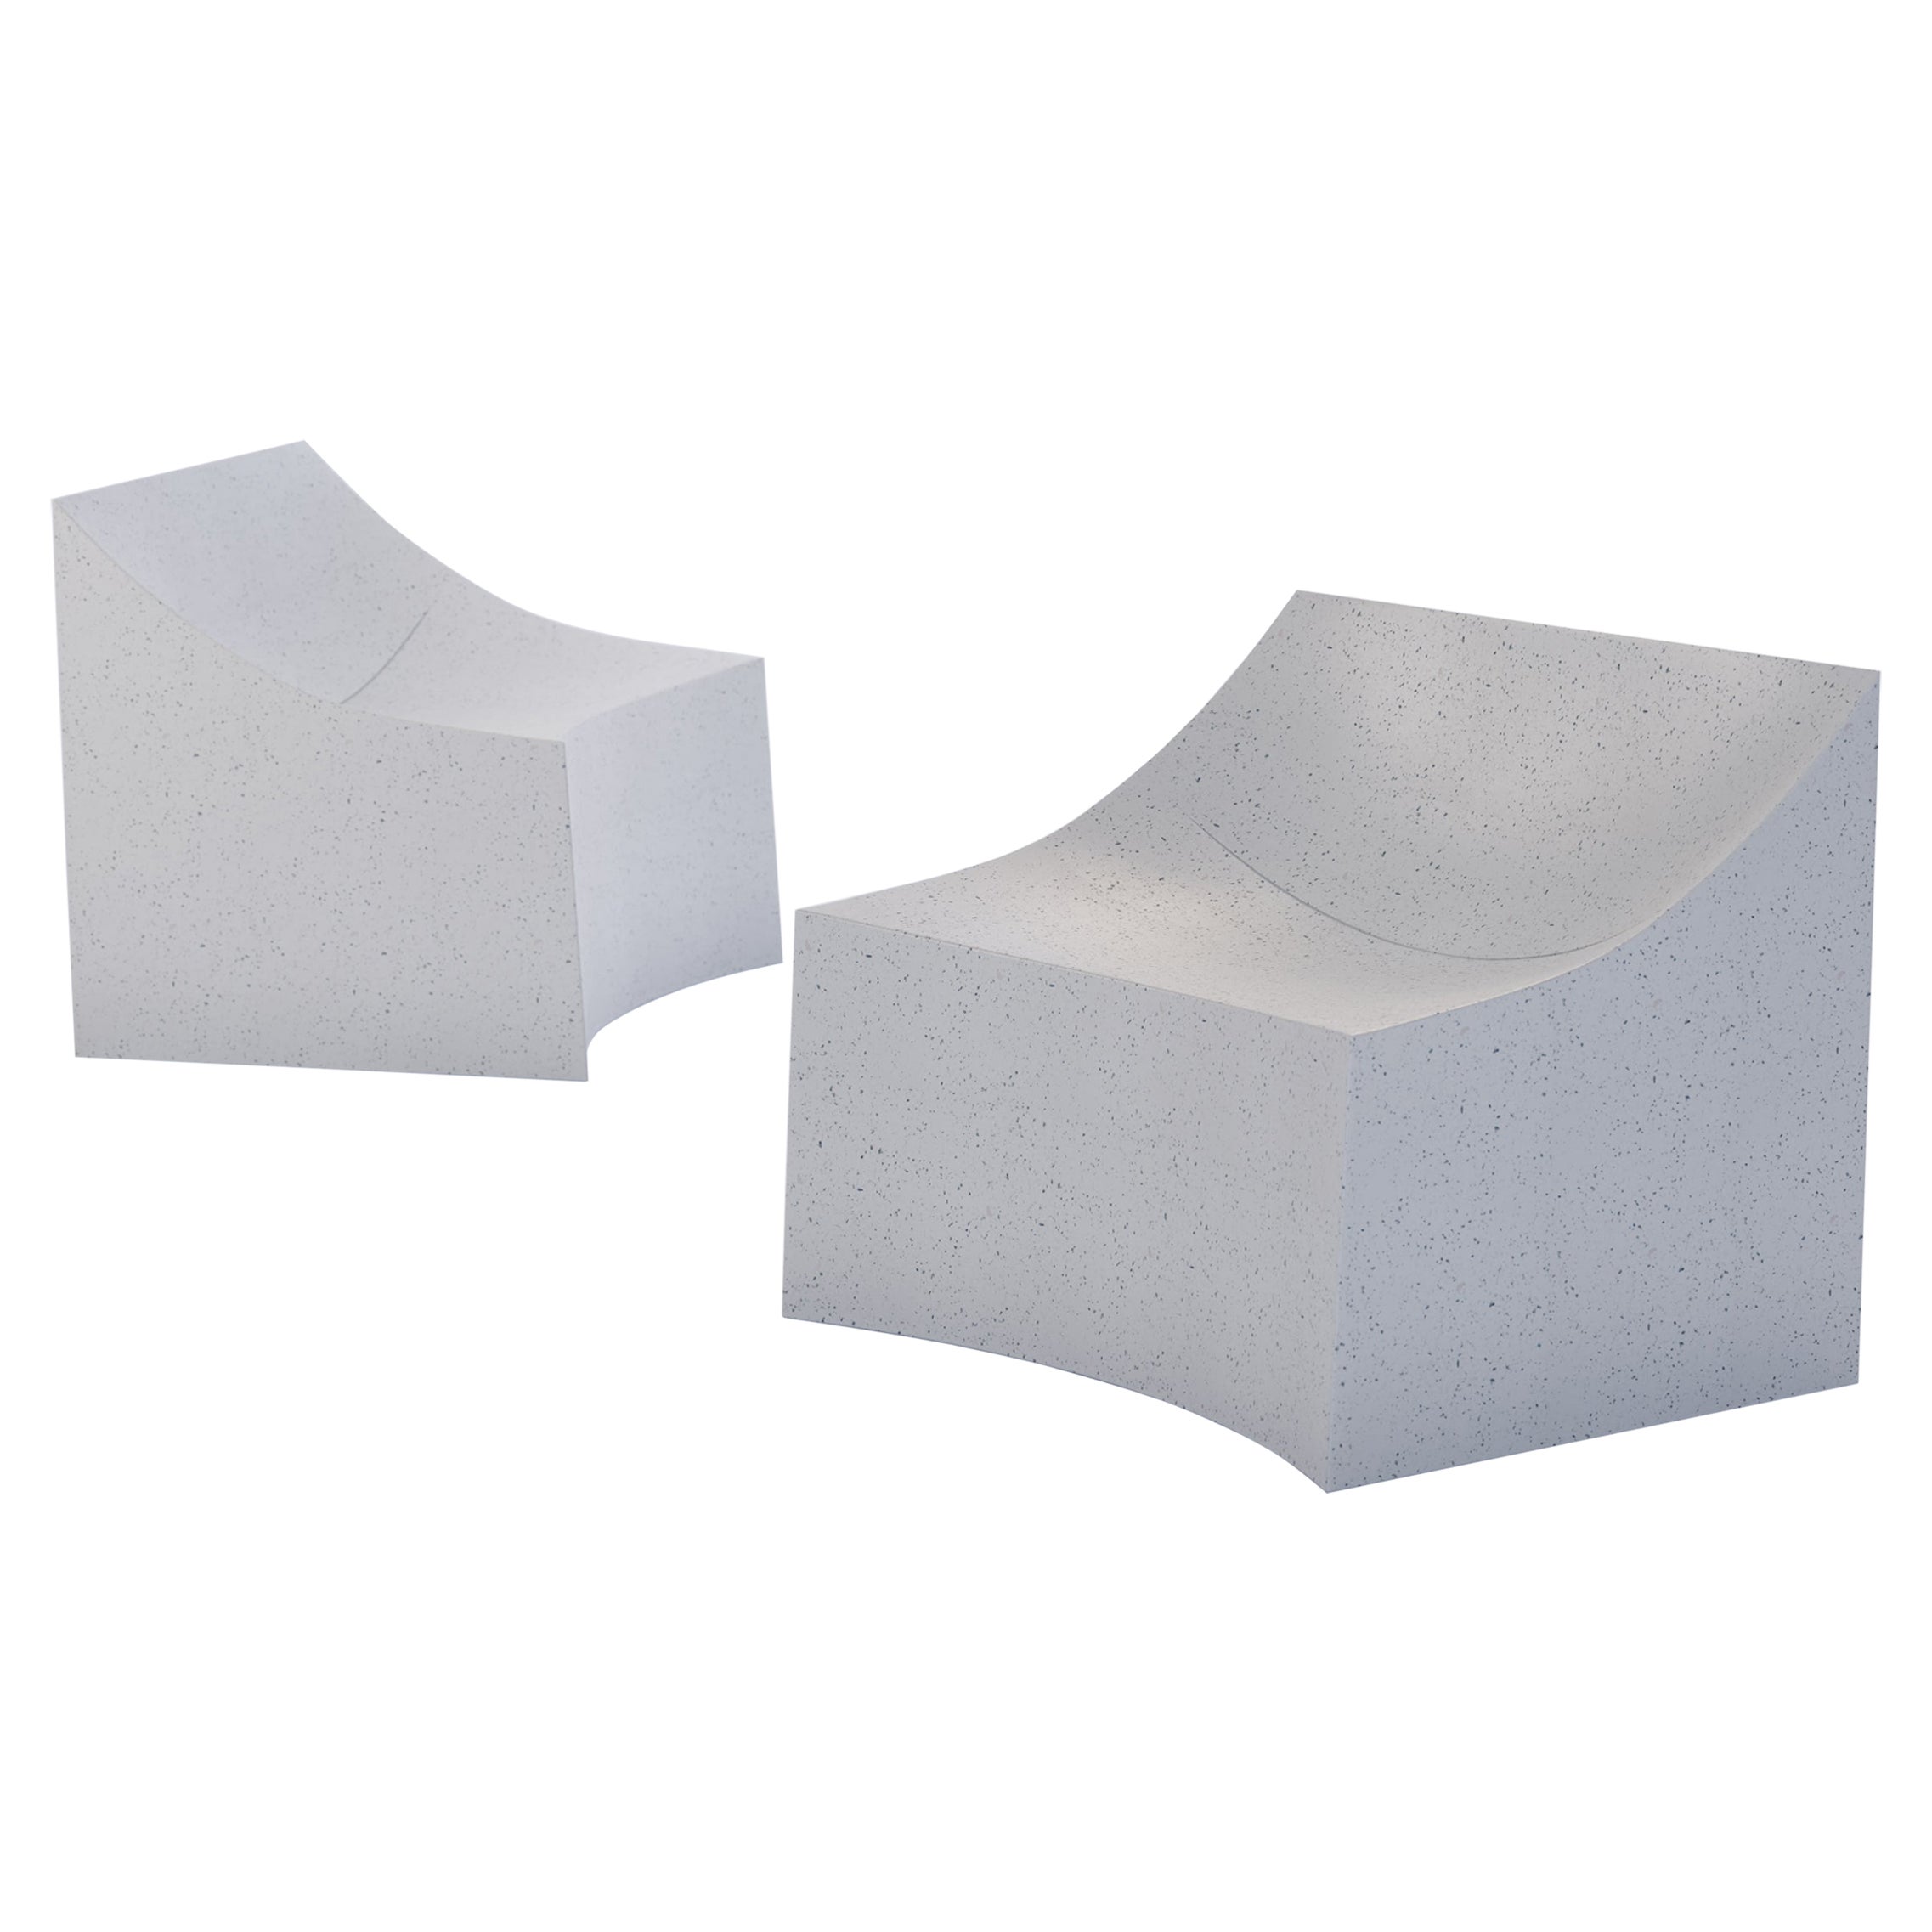 Cast Resin 'Lucio' Lounge Chair, White Stone Finish by Zachary A. Design For Sale